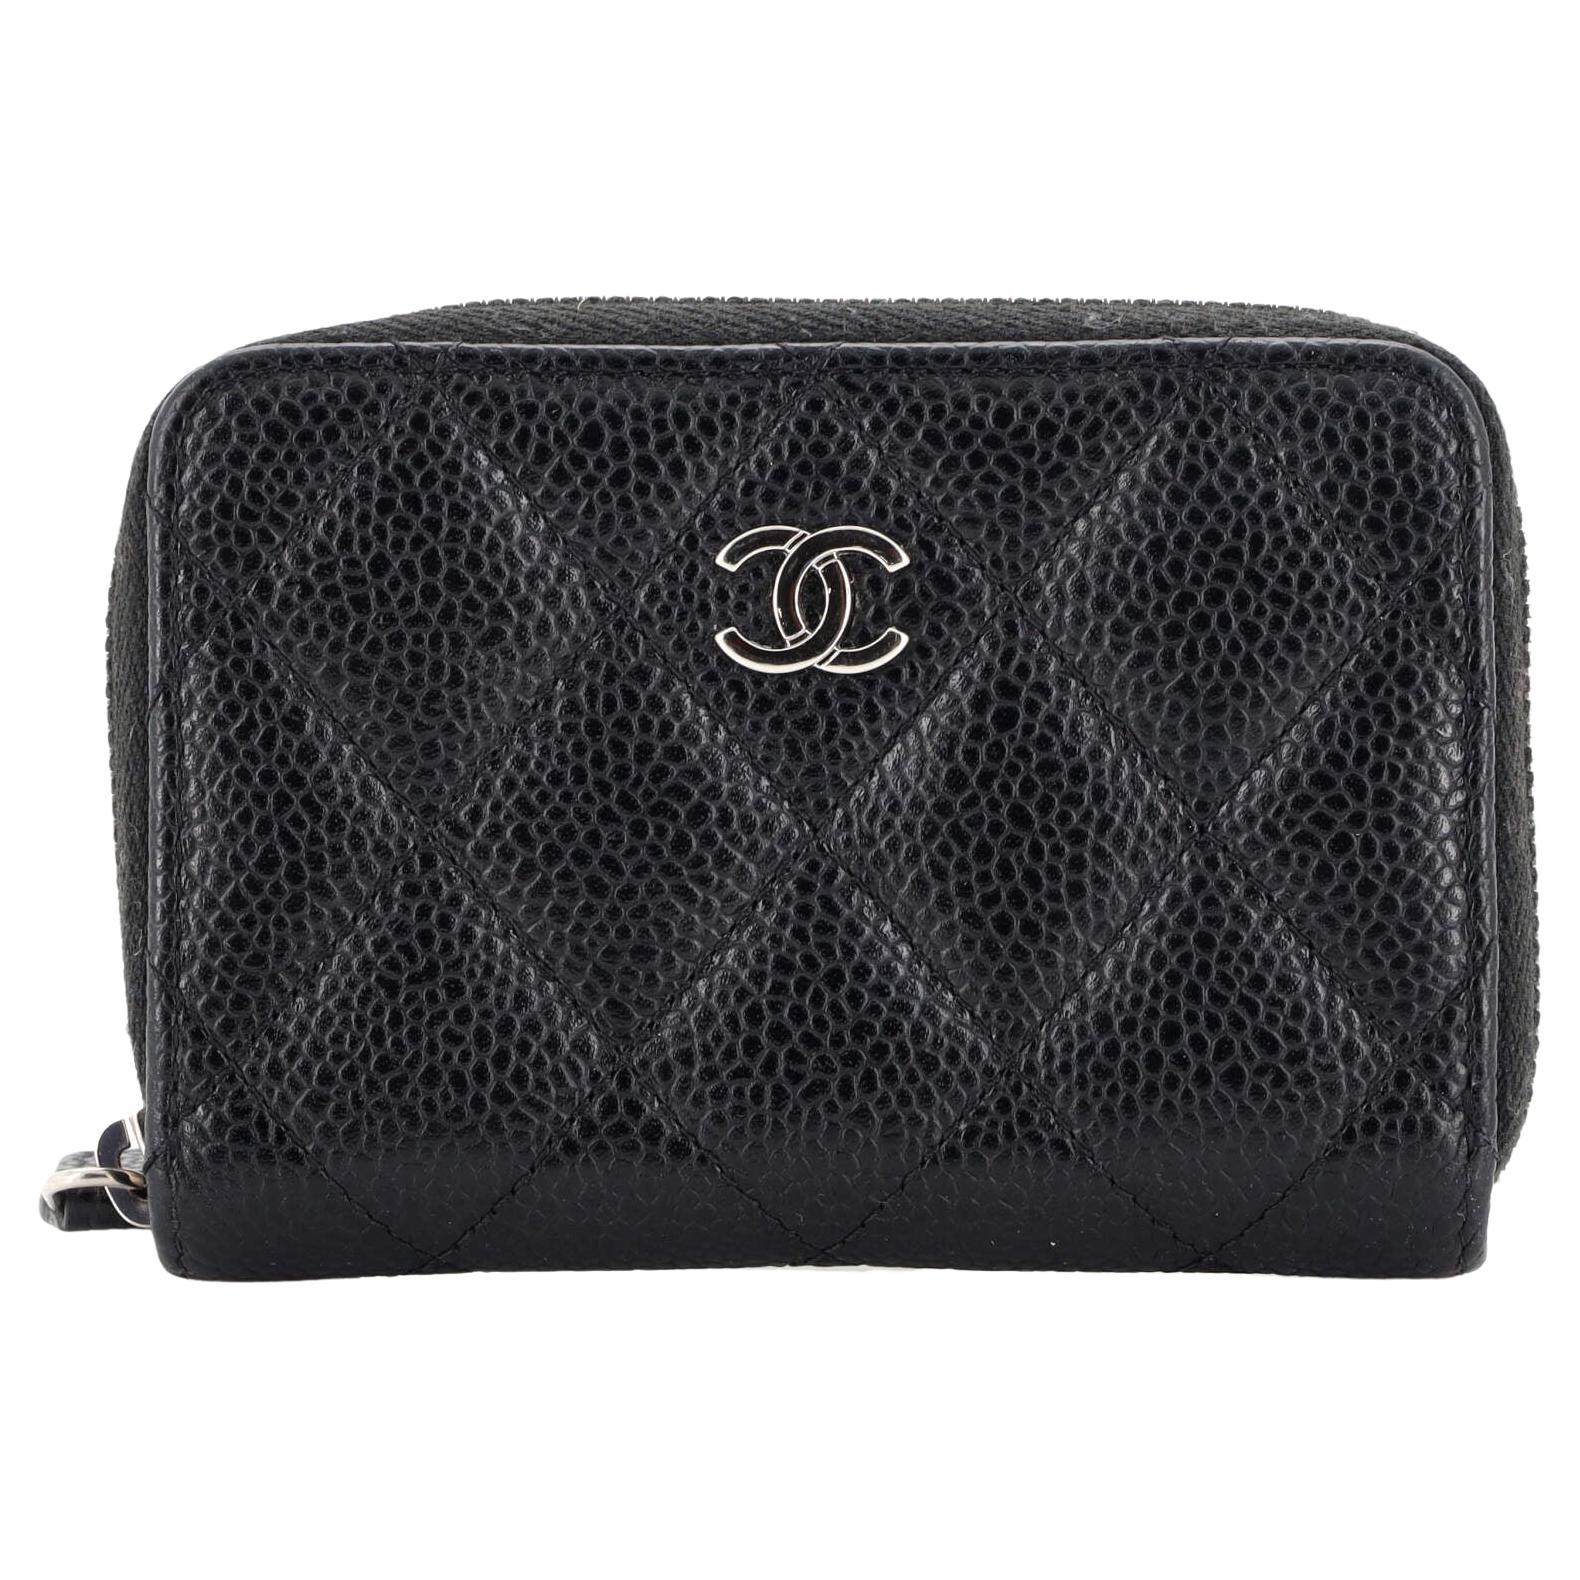 Shop CHANEL TIMELESS CLASSICS 2023-24FW Classic Zipped Coin Purse ( AP0216)  by mayluxury